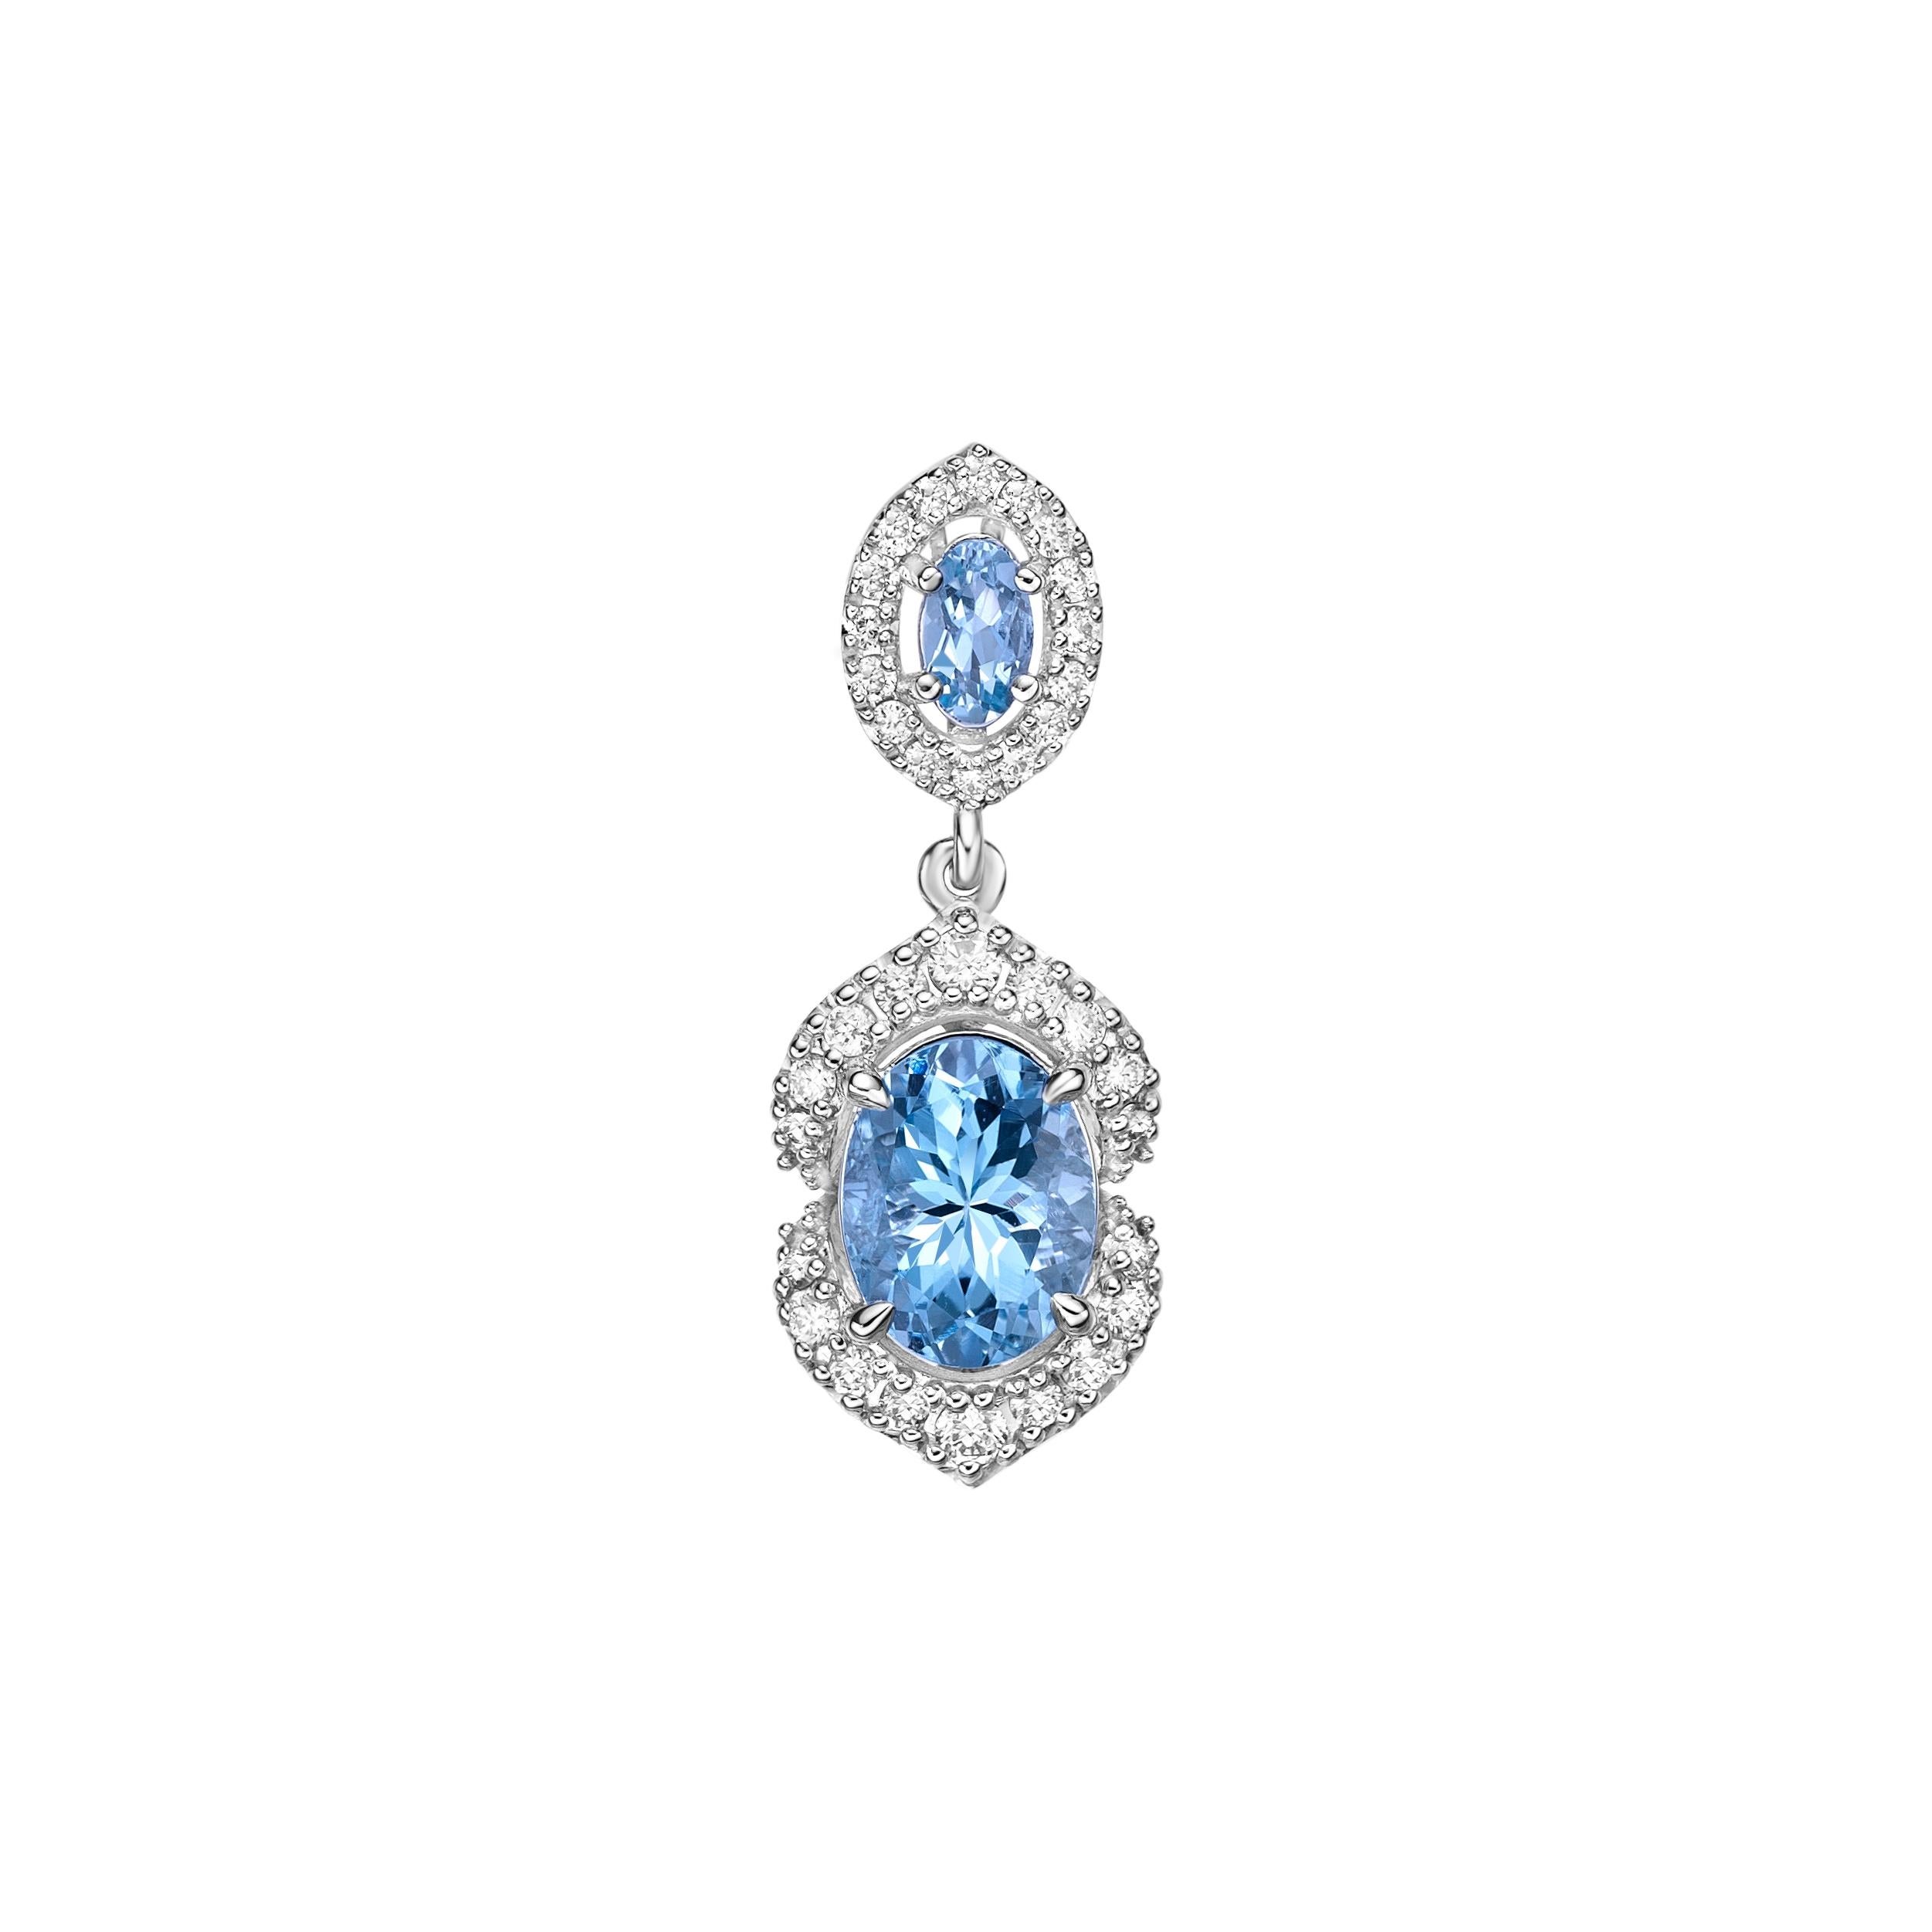 Elevate your look with our stunning Santa Maria aquamarine set, featuring a mesmerizing ice blue hue that radiates elegance. Enhanced with diamonds and crafted in white gold, this pendant offers a timeless allure with a touch of modern